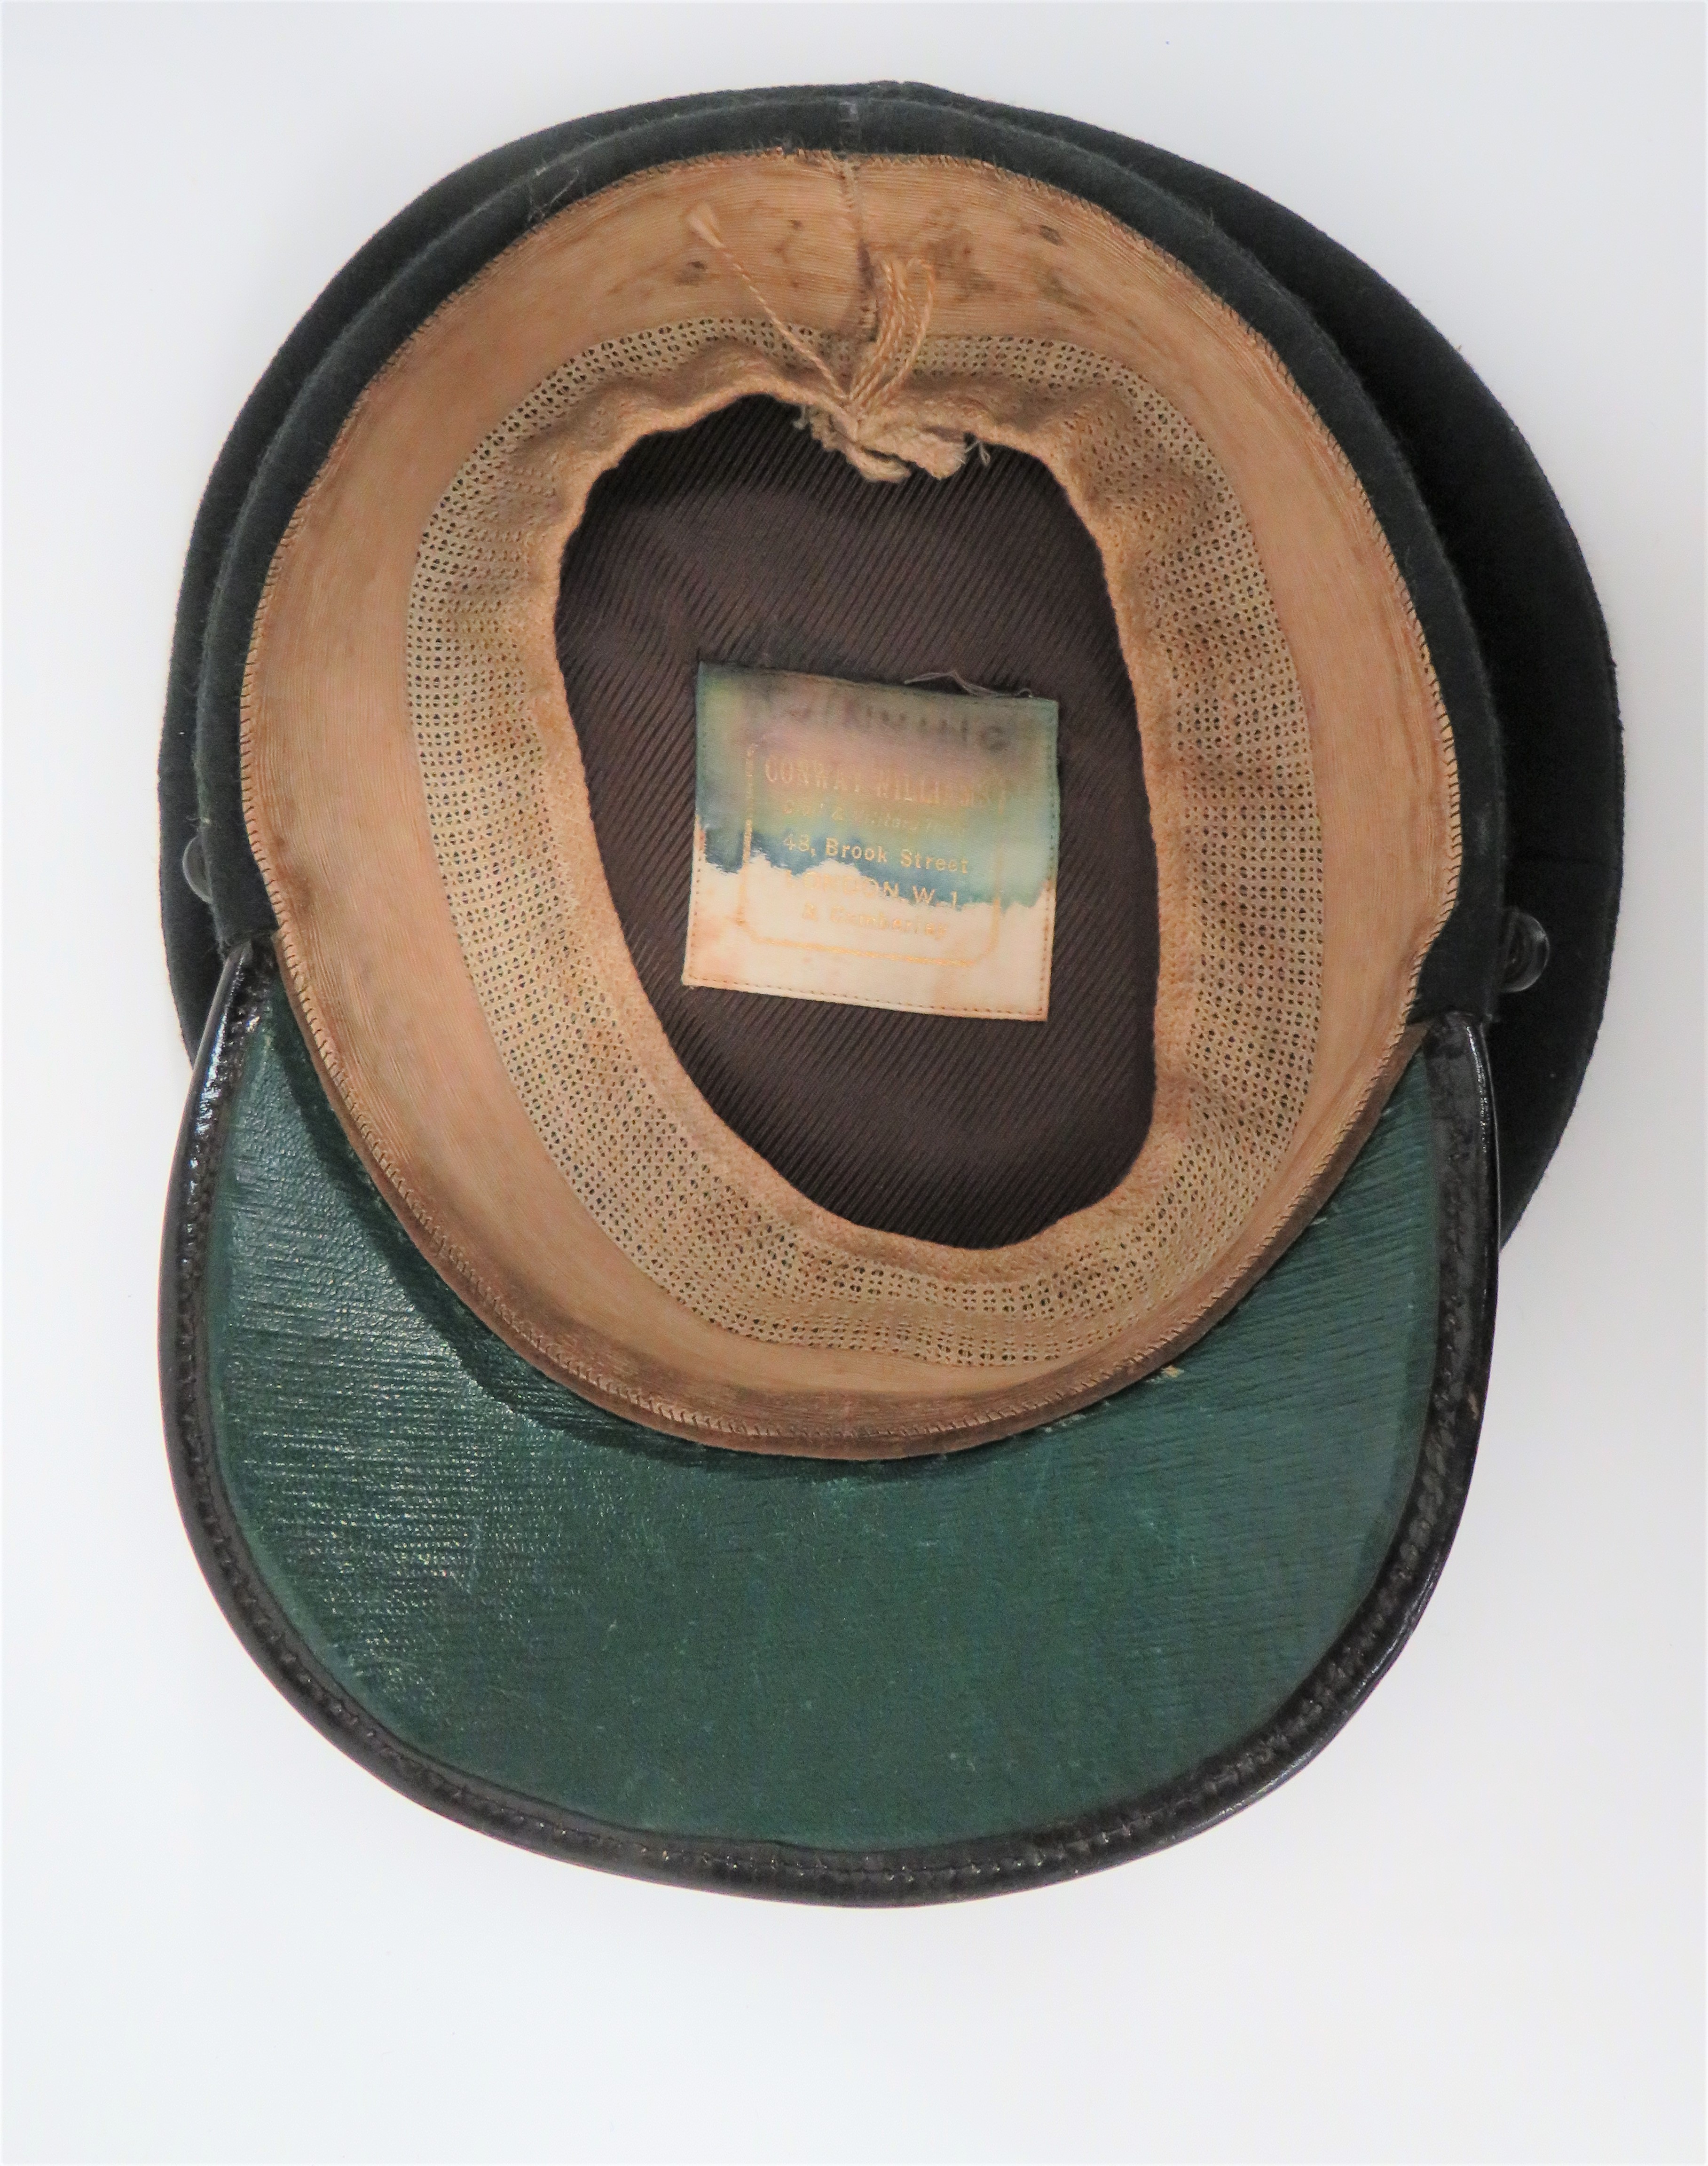 Liverpool Rifles Officer's Dress Cap dark green crown and body with green piping.  Dark green mohair - Image 2 of 2